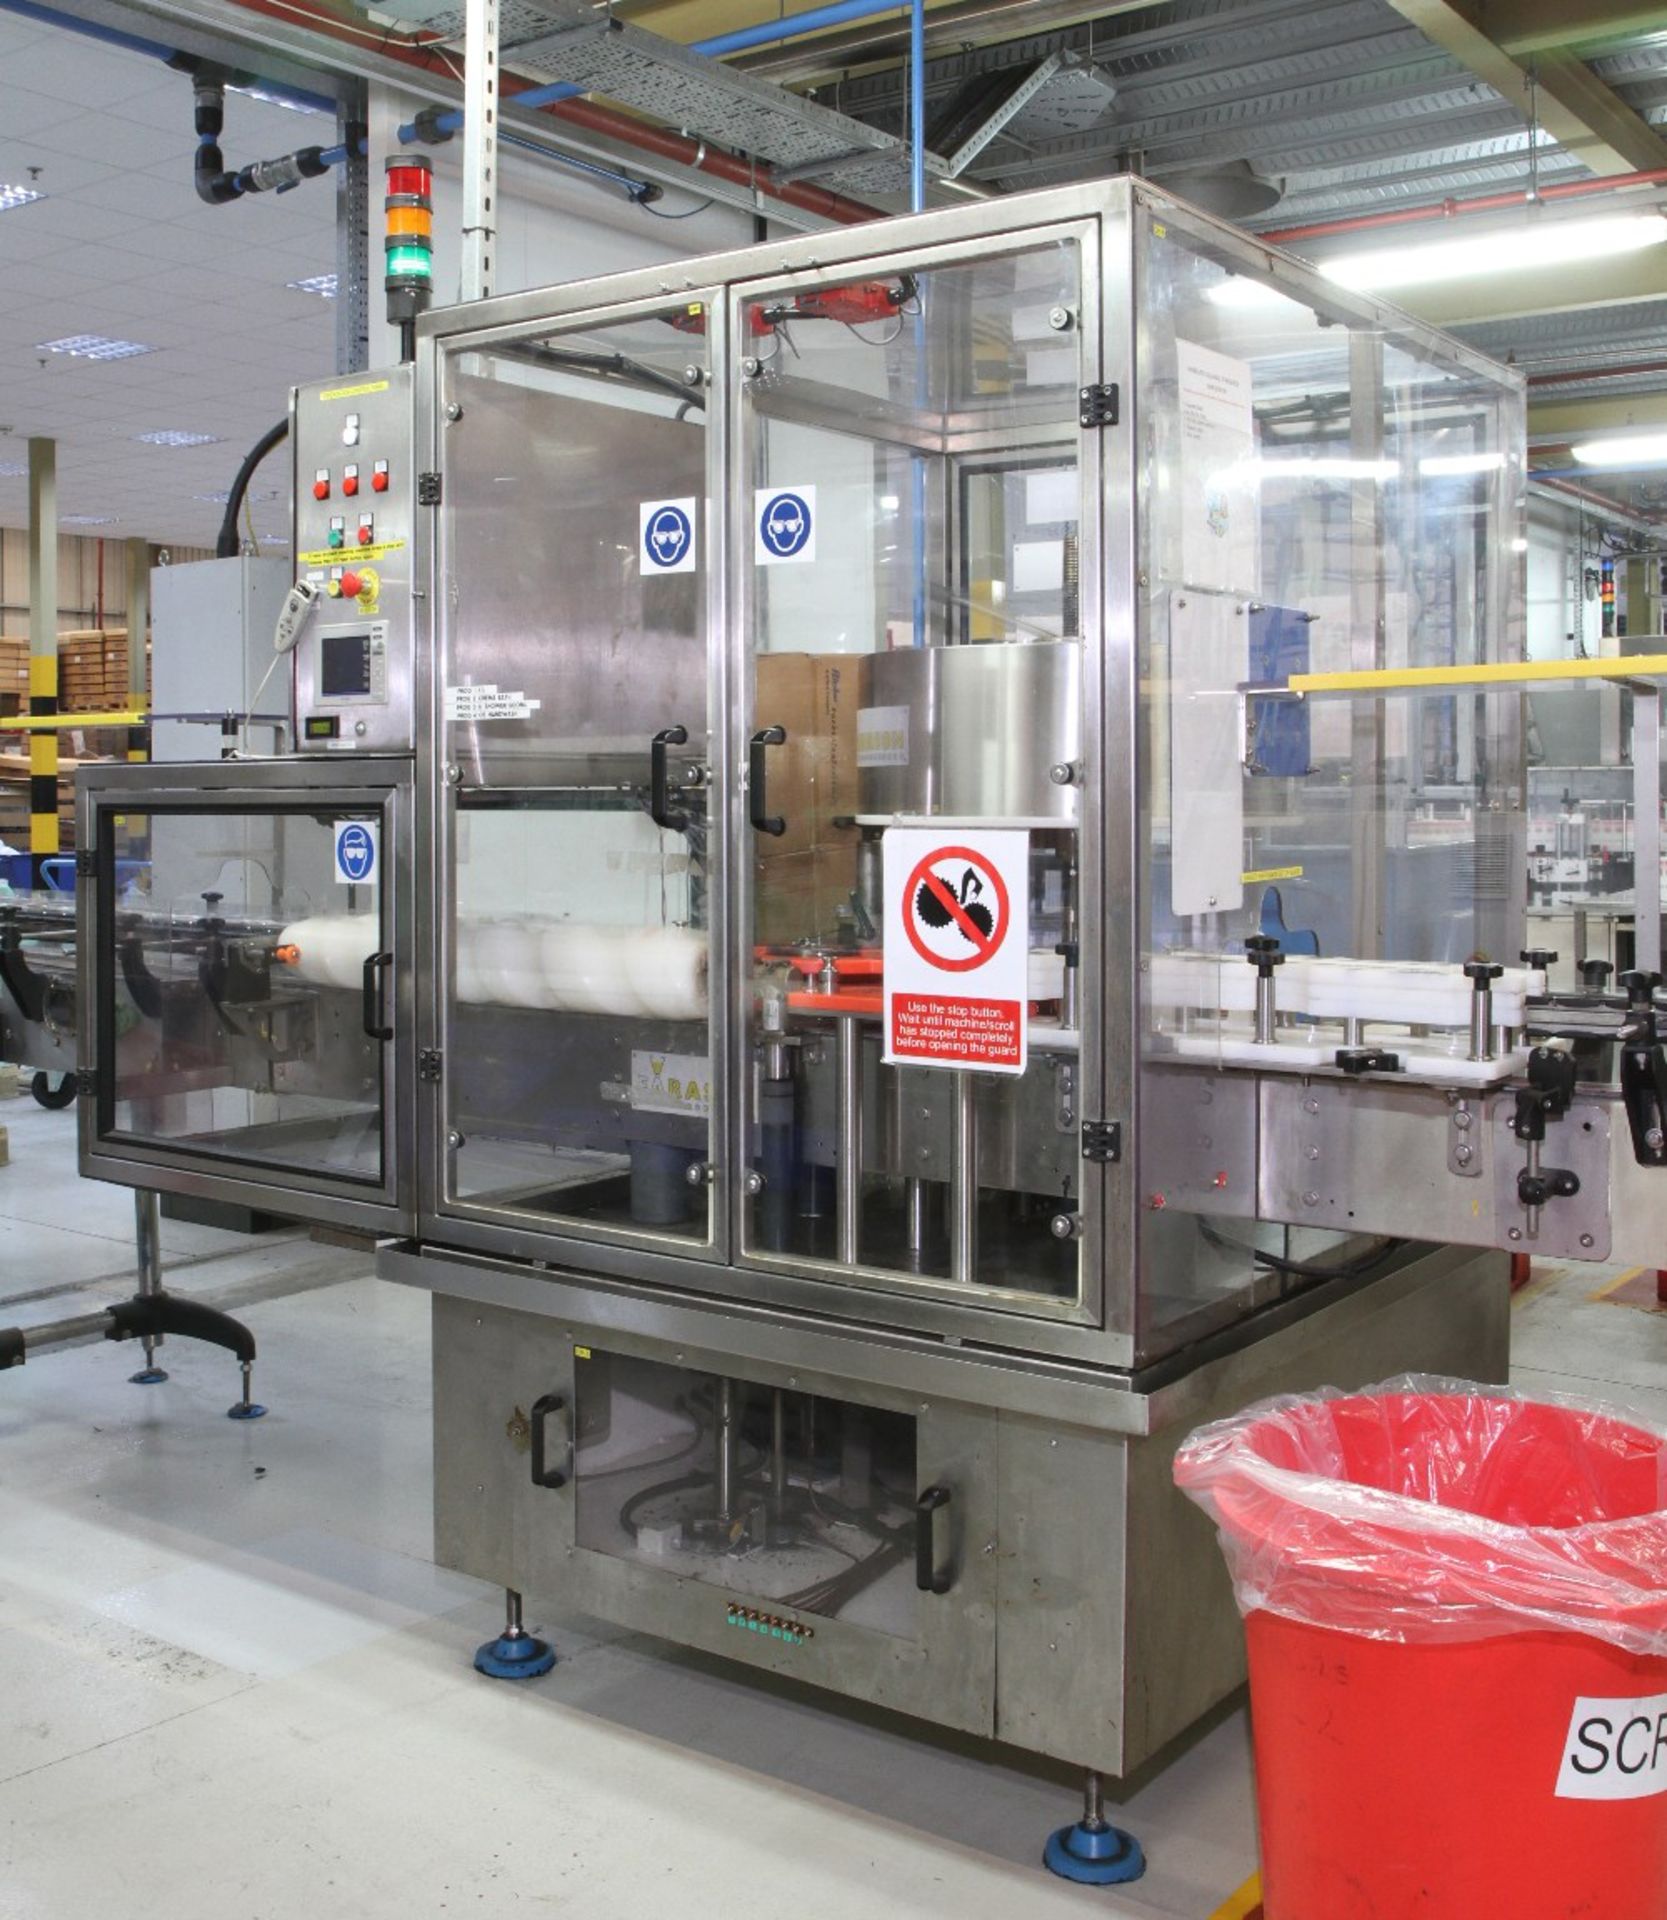 Contents Of World Class Manufacturer's Bottling Line. - Image 26 of 87